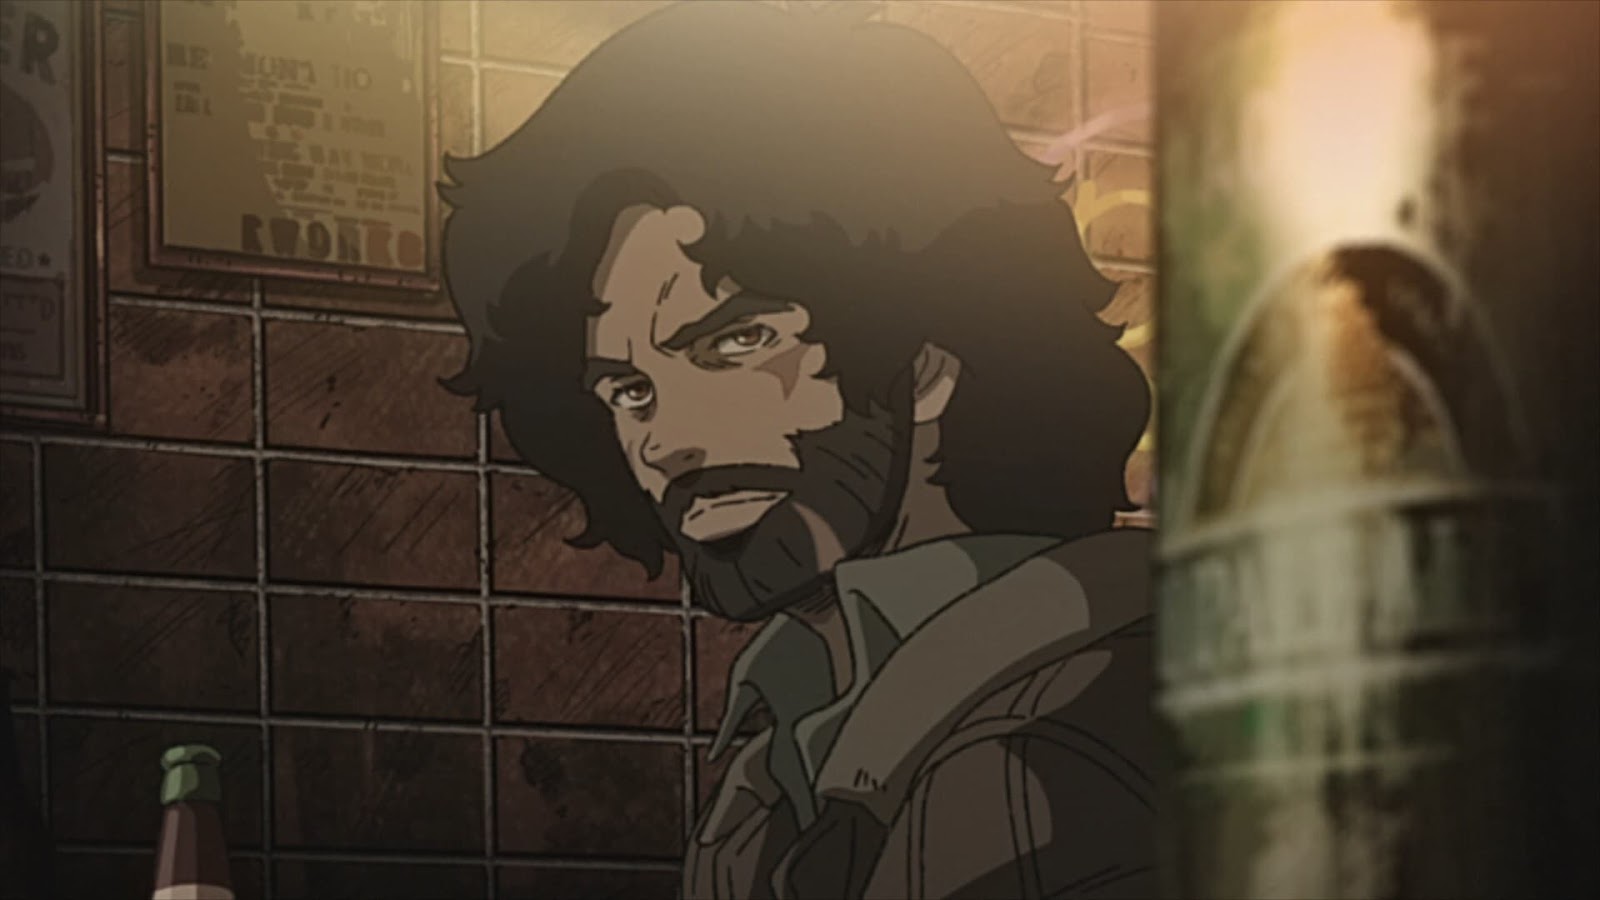 Joe from Megalobox glancing to the side while frowning. He has long hair and a full beard.